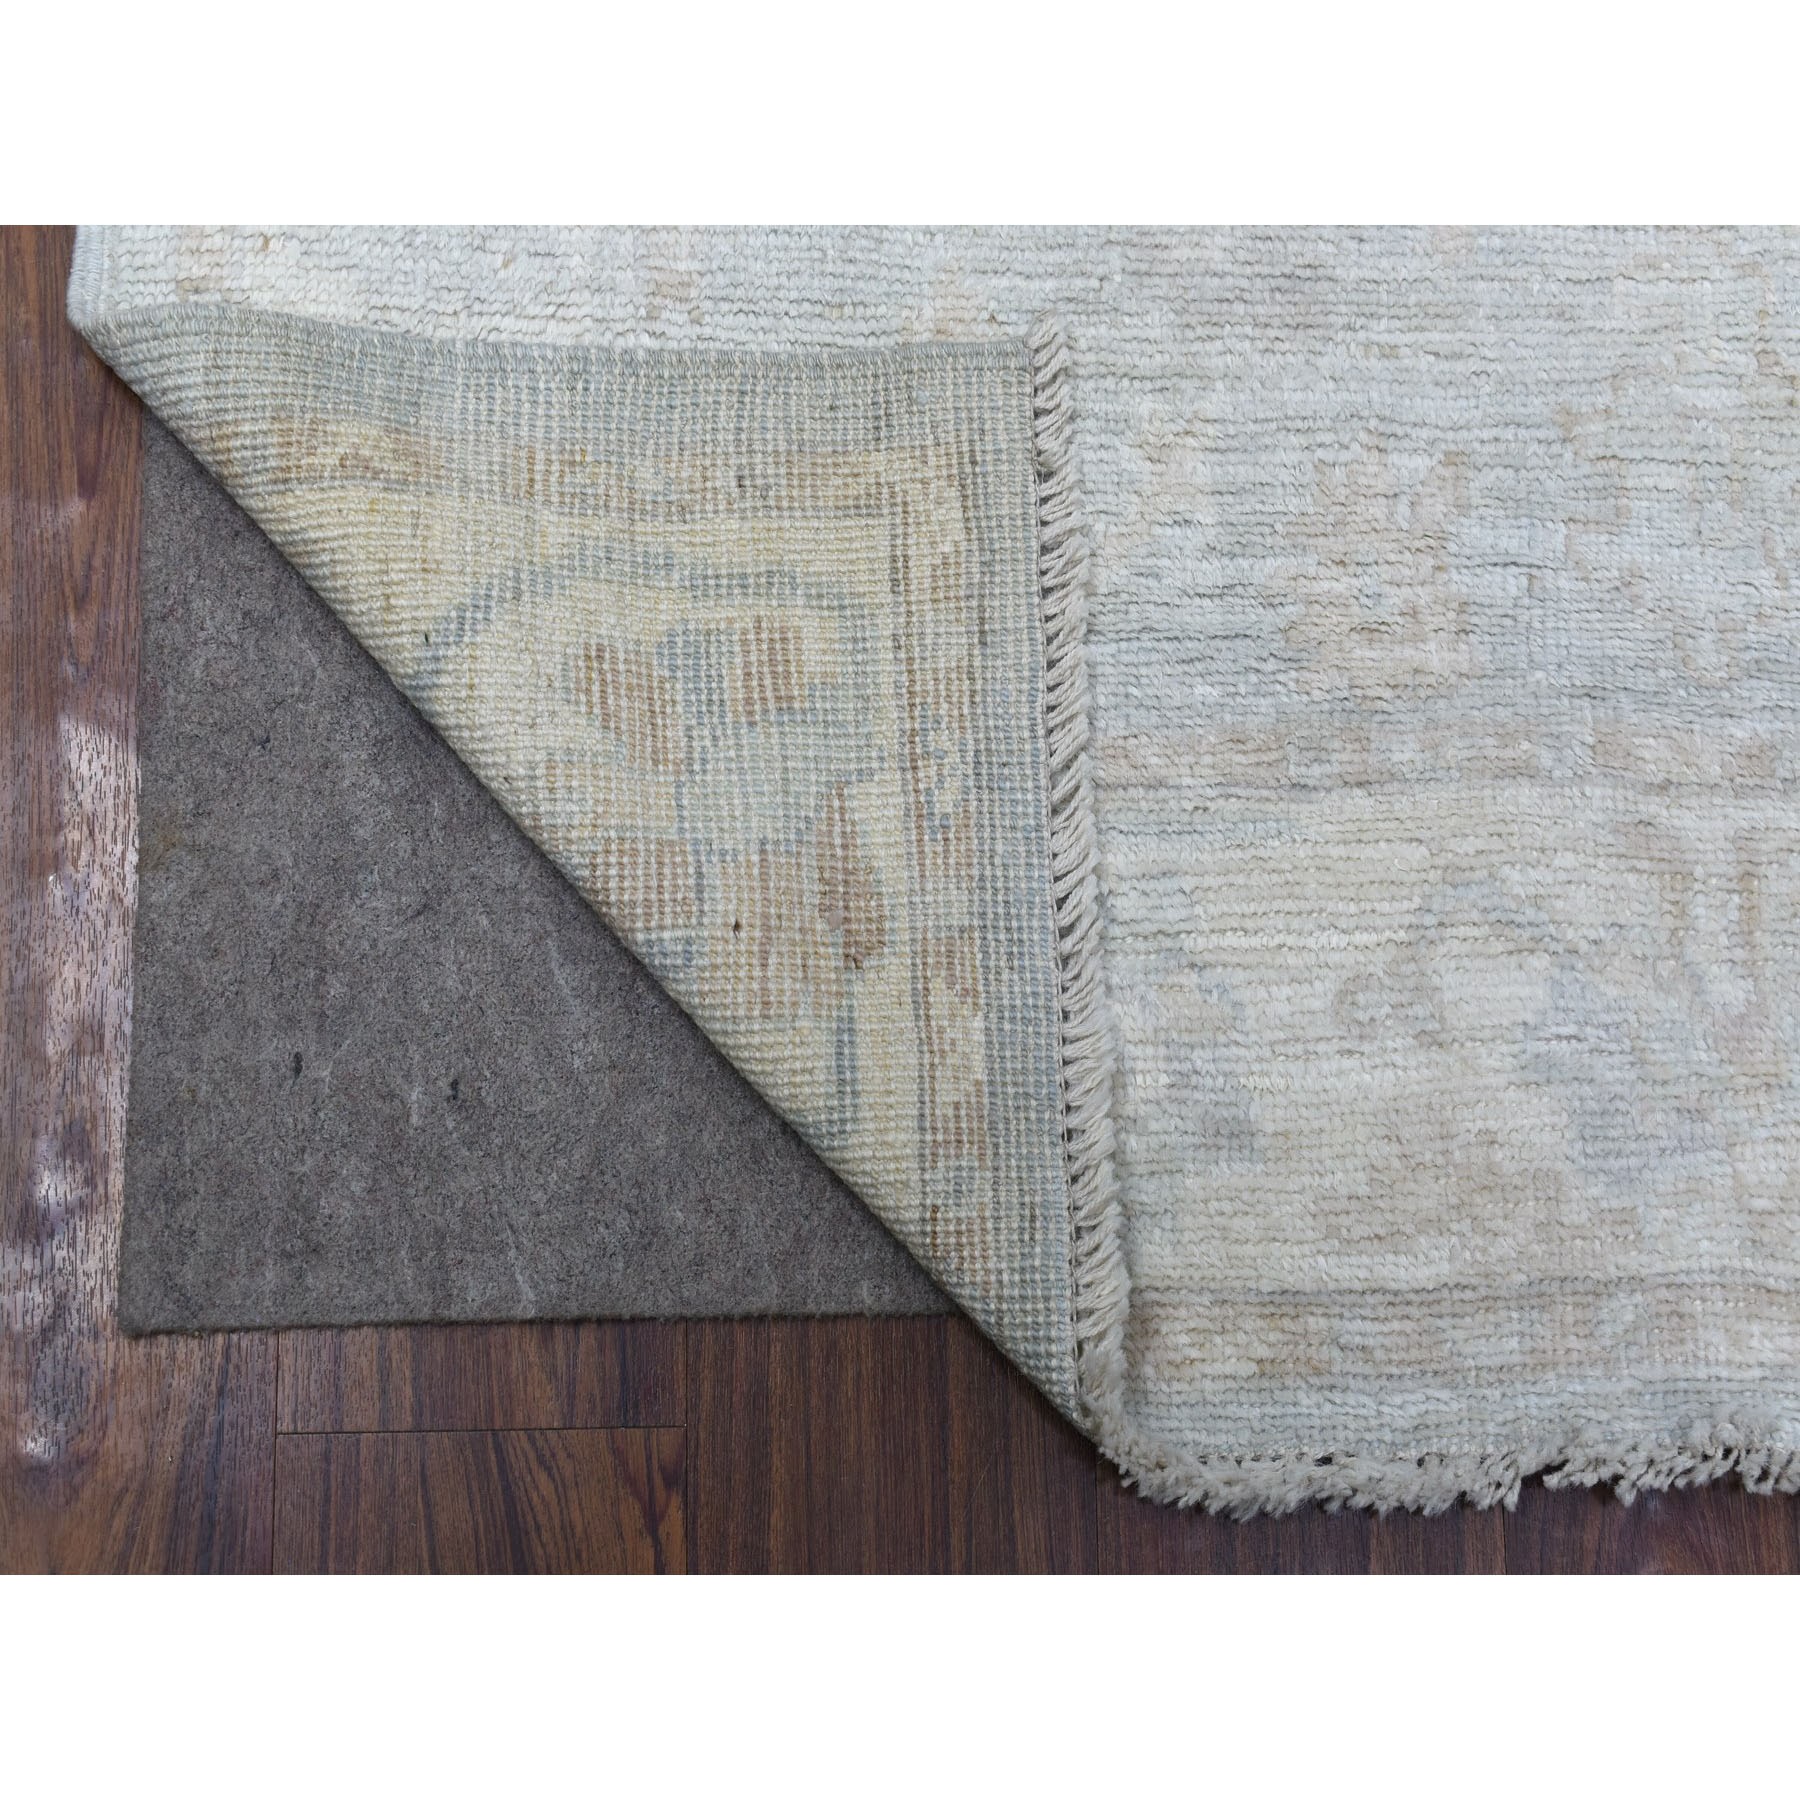 4'2"x9'9" Gray Angora Oushak with Faded Out Colors Pure Wool Hand Woven Oriental Wide Runner Rug 